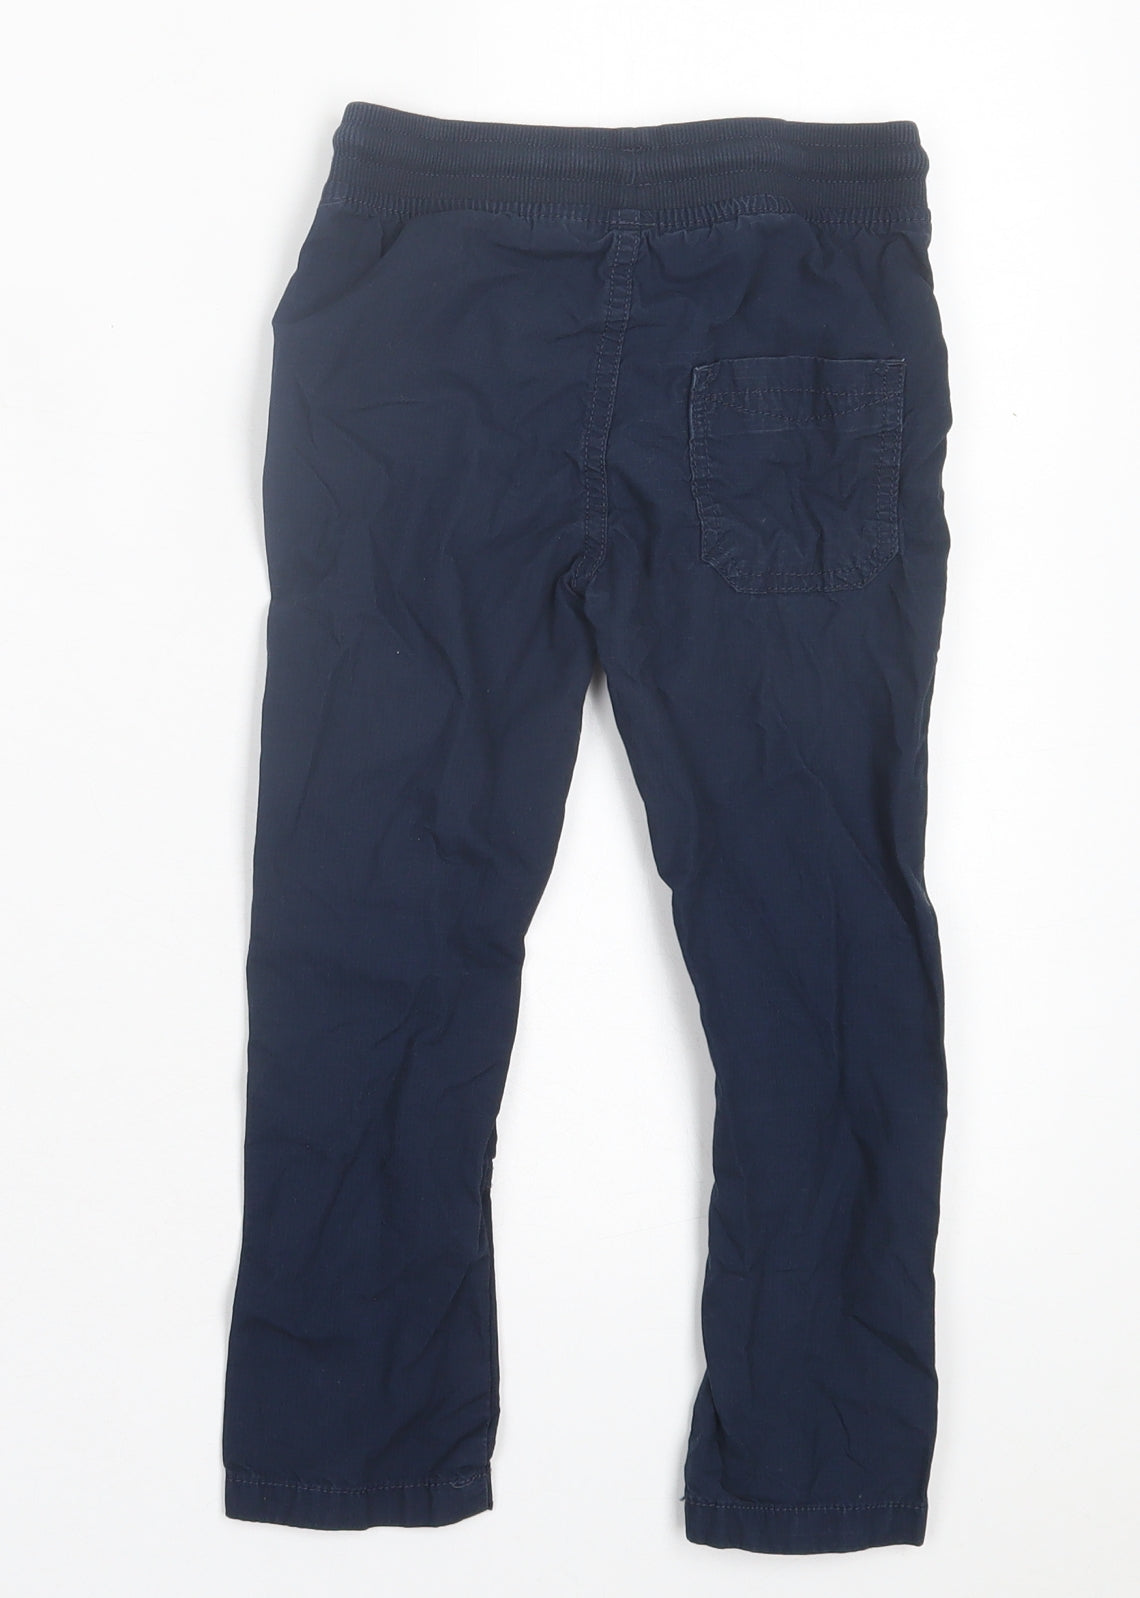 Marks and Spencer Boys Blue Cotton Capri Trousers Size 4-5 Years Regular Drawstring